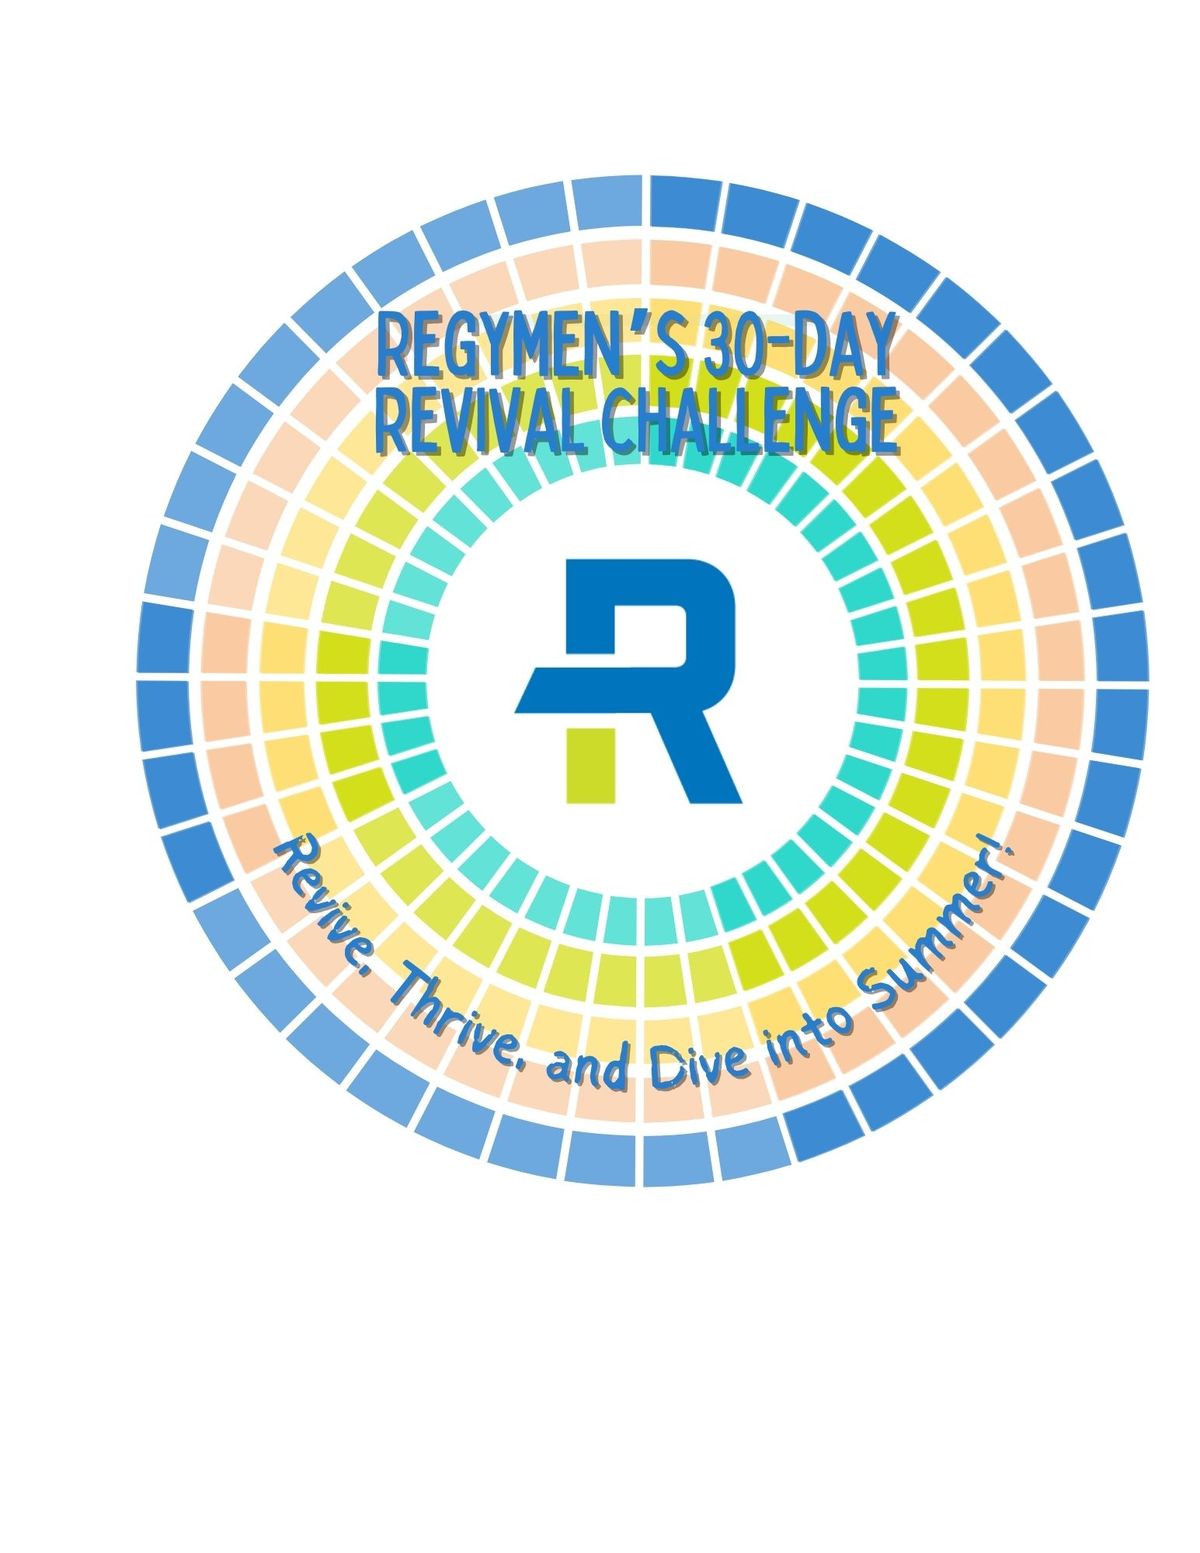 REGYMEN Revival 30 Day Challenge